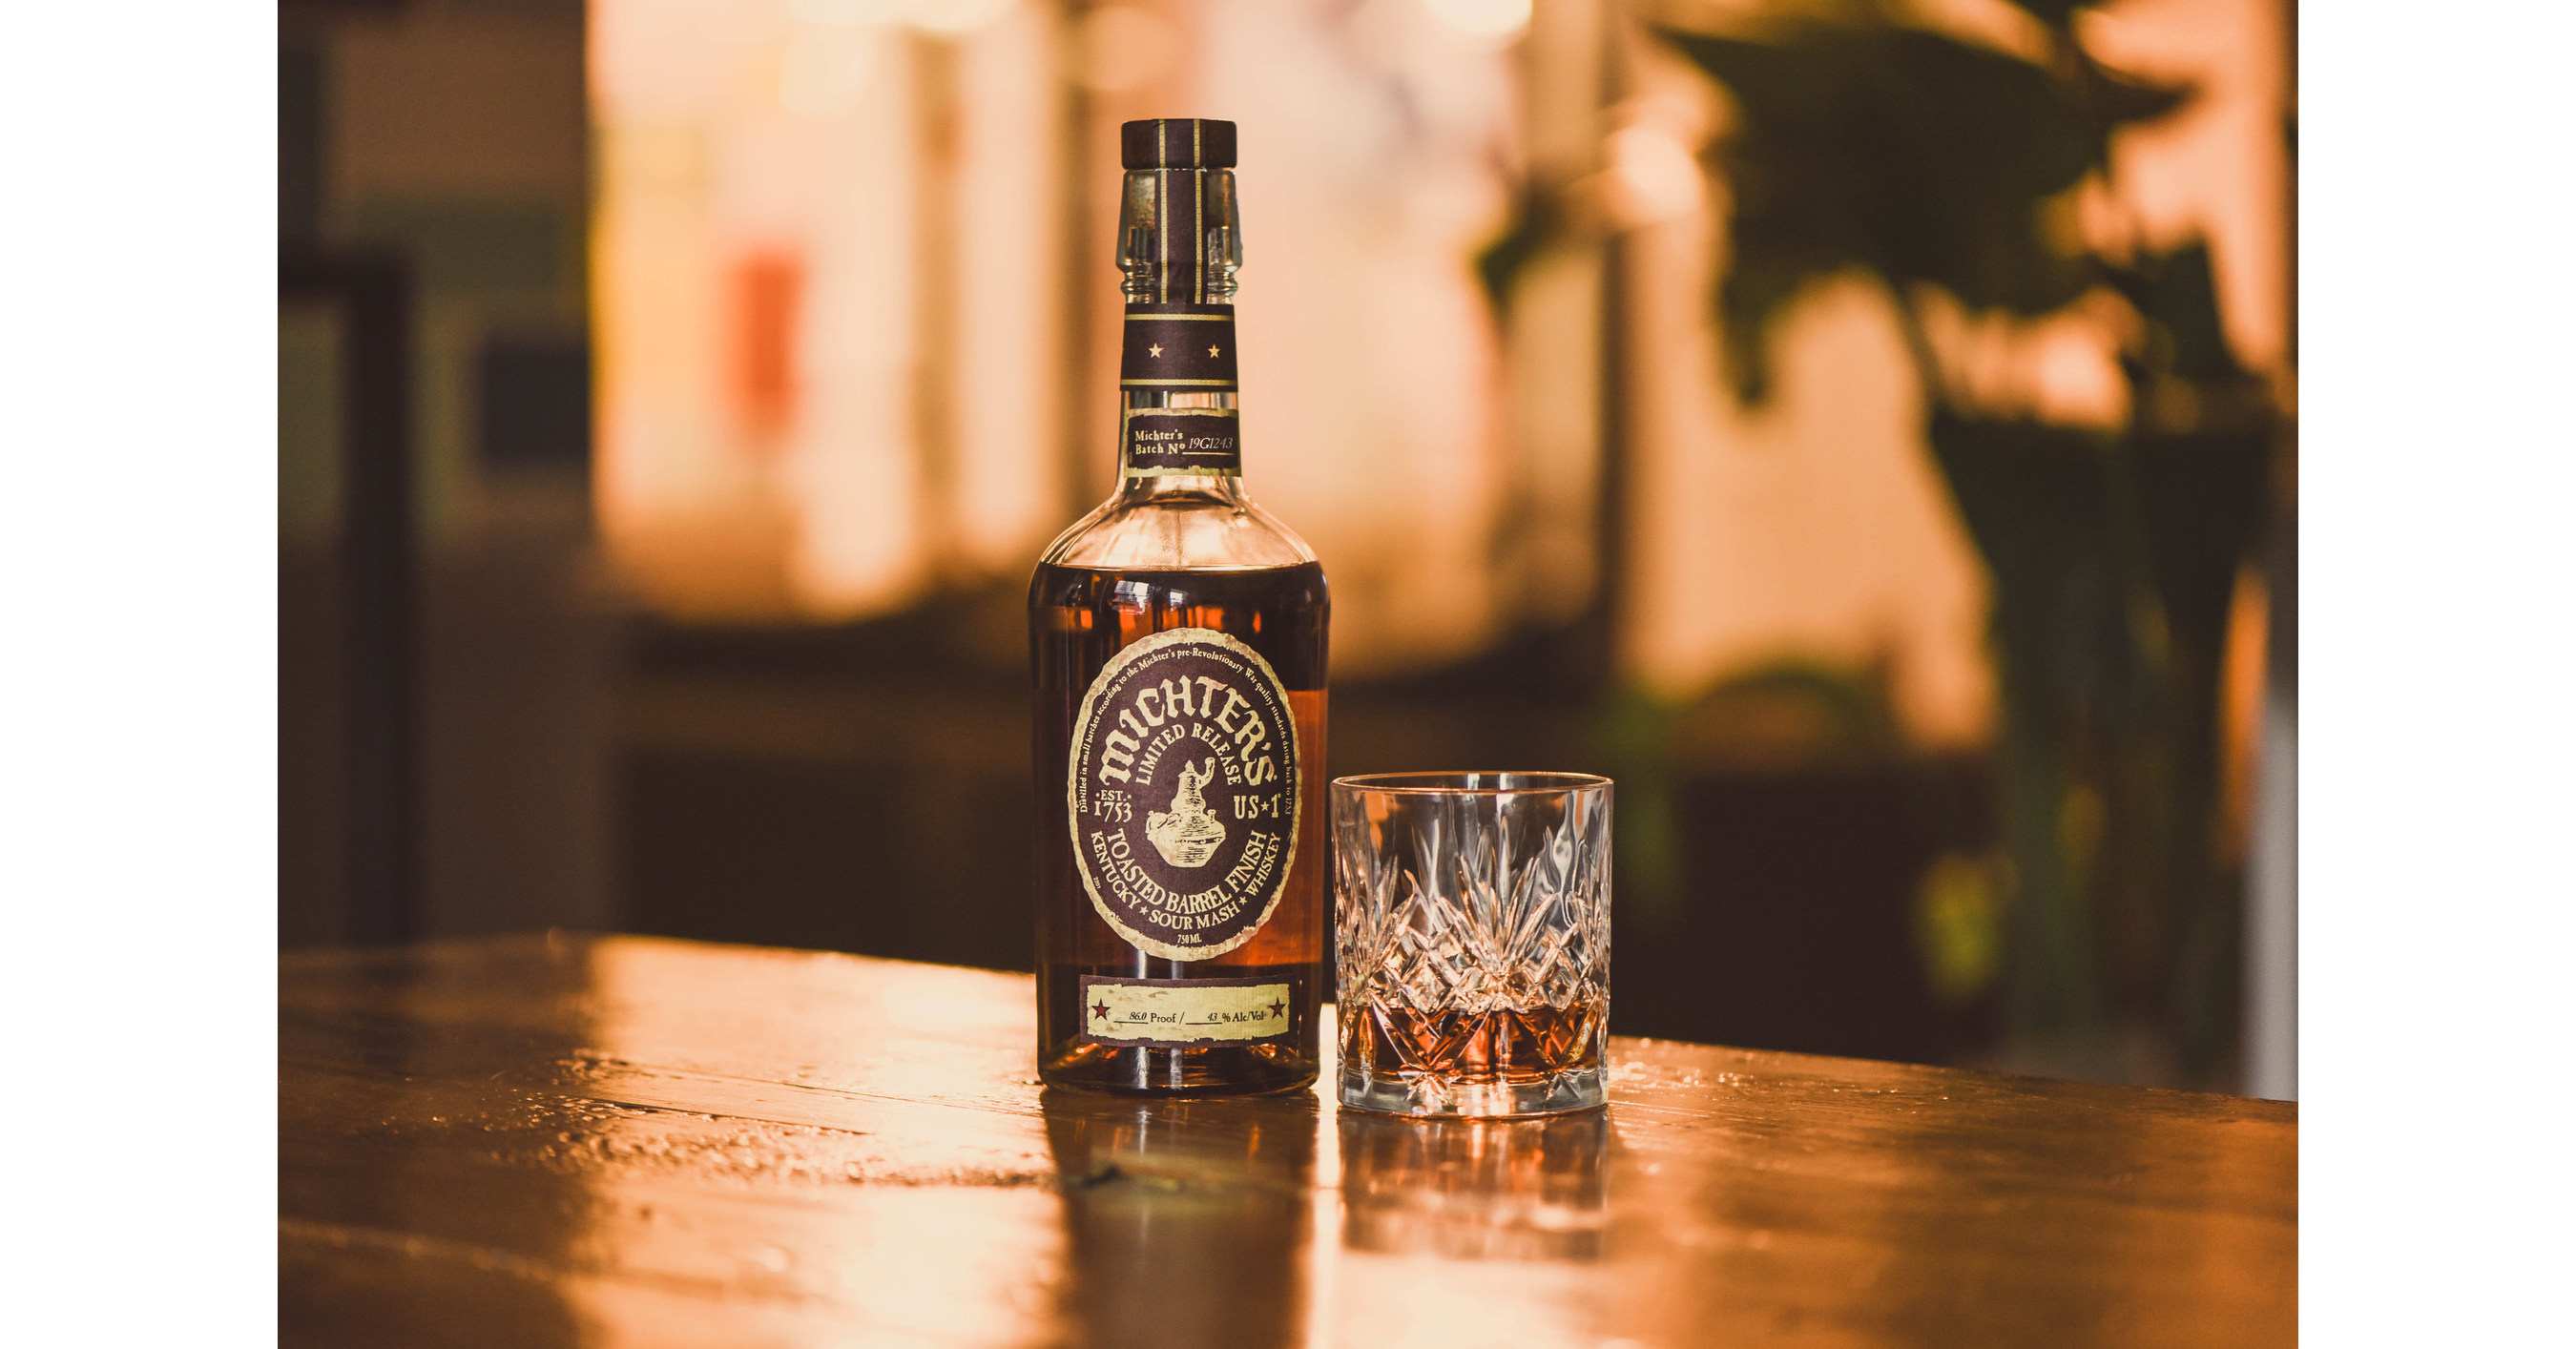 Michter's Toasted Barrel Finish Sour Mash ... Upon its being named “Whisky Of The Year” for 2019 by The Whisky Exchange 20% off